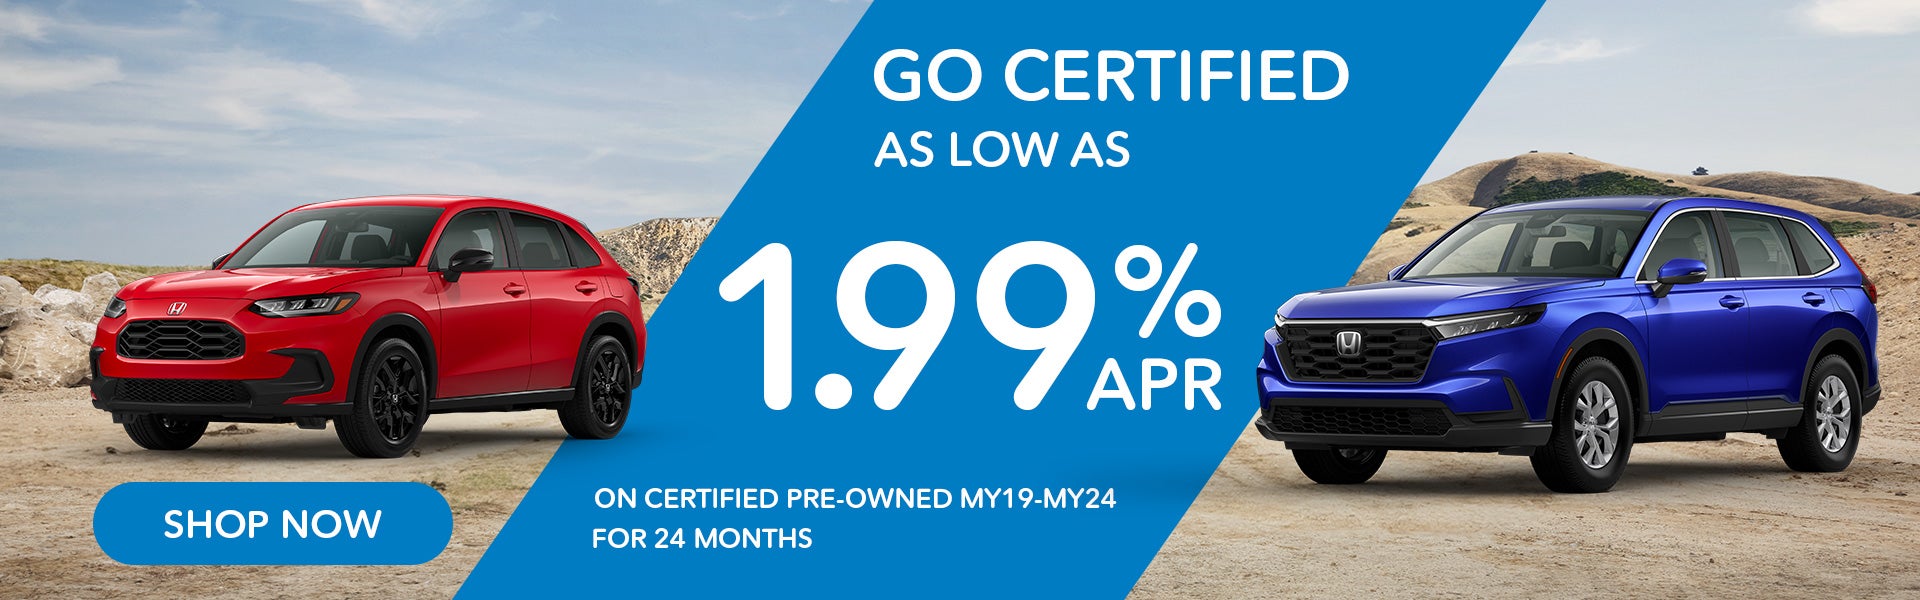 Honda Certified Pre-Owned 1.99% APR Special